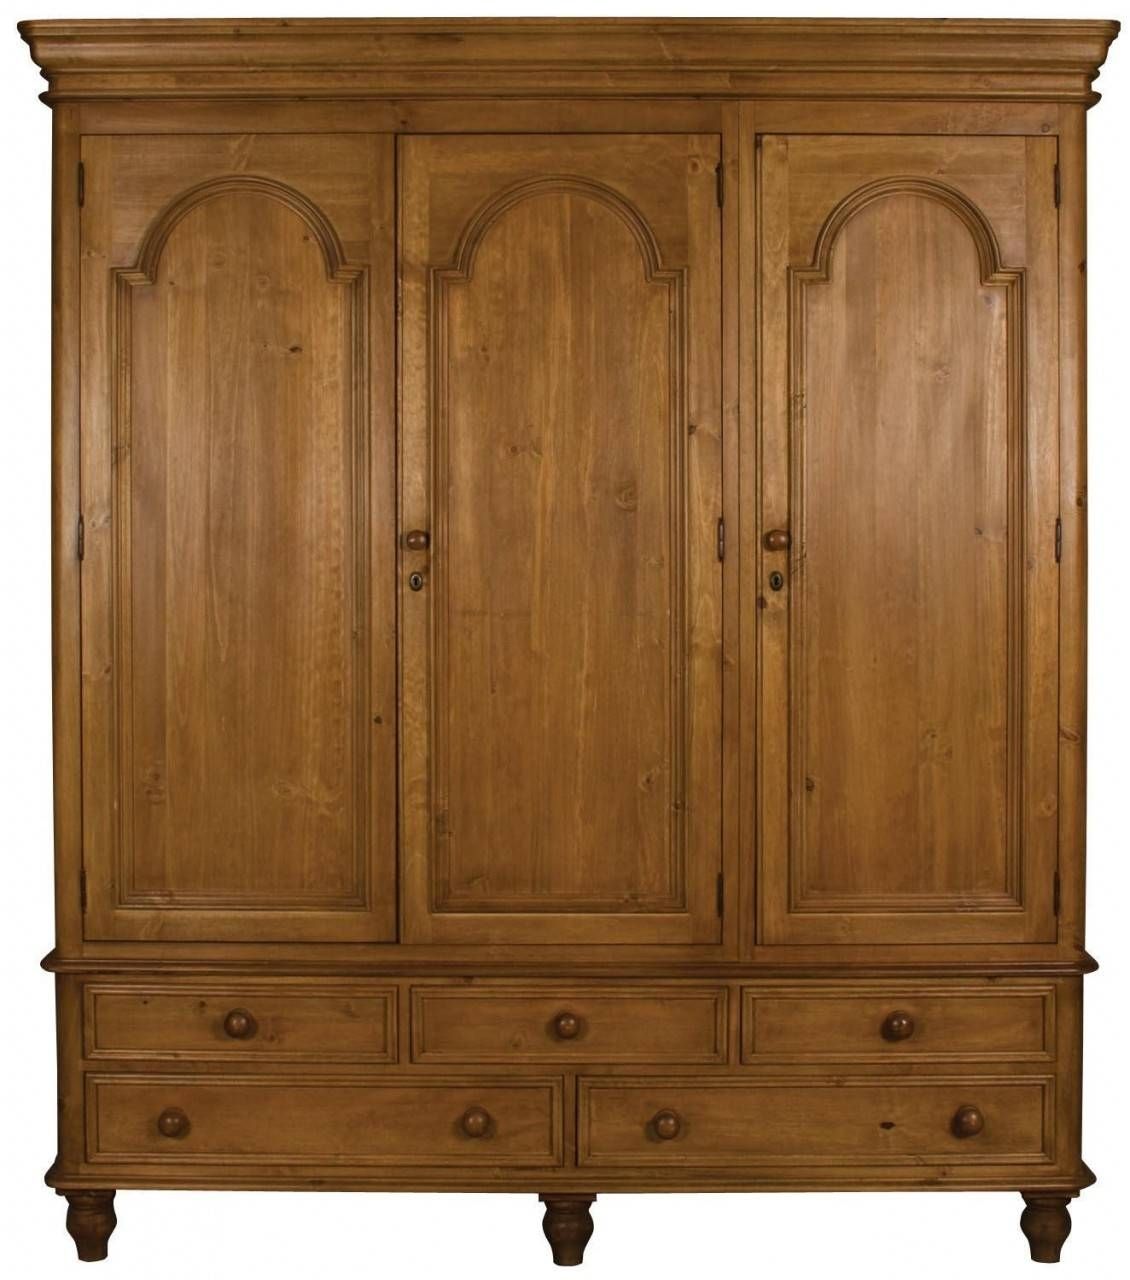 Buy Ascot Pine Wardrobe – Double 2 Doors 3 Drawers Online – Cfs Uk Throughout Pine Wardrobes With Drawers (View 11 of 15)